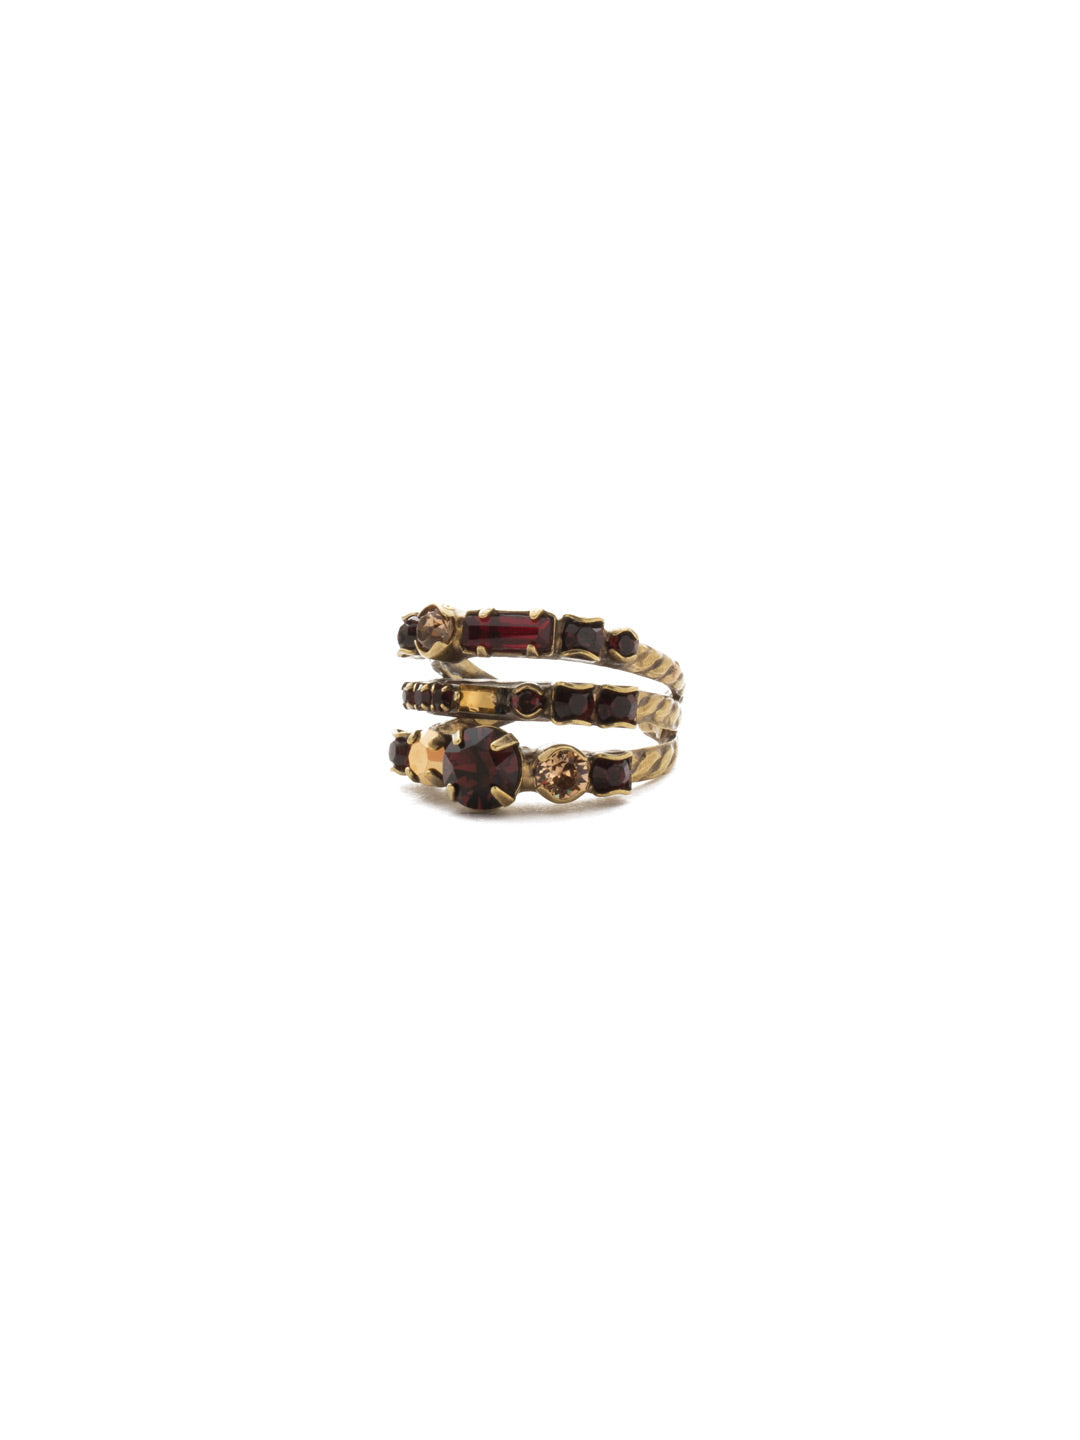 Triple Threat Stacked Ring - RDK23AGMMA - Three rows of crystal encrusted bands are joined together for a stacked, stylish look.